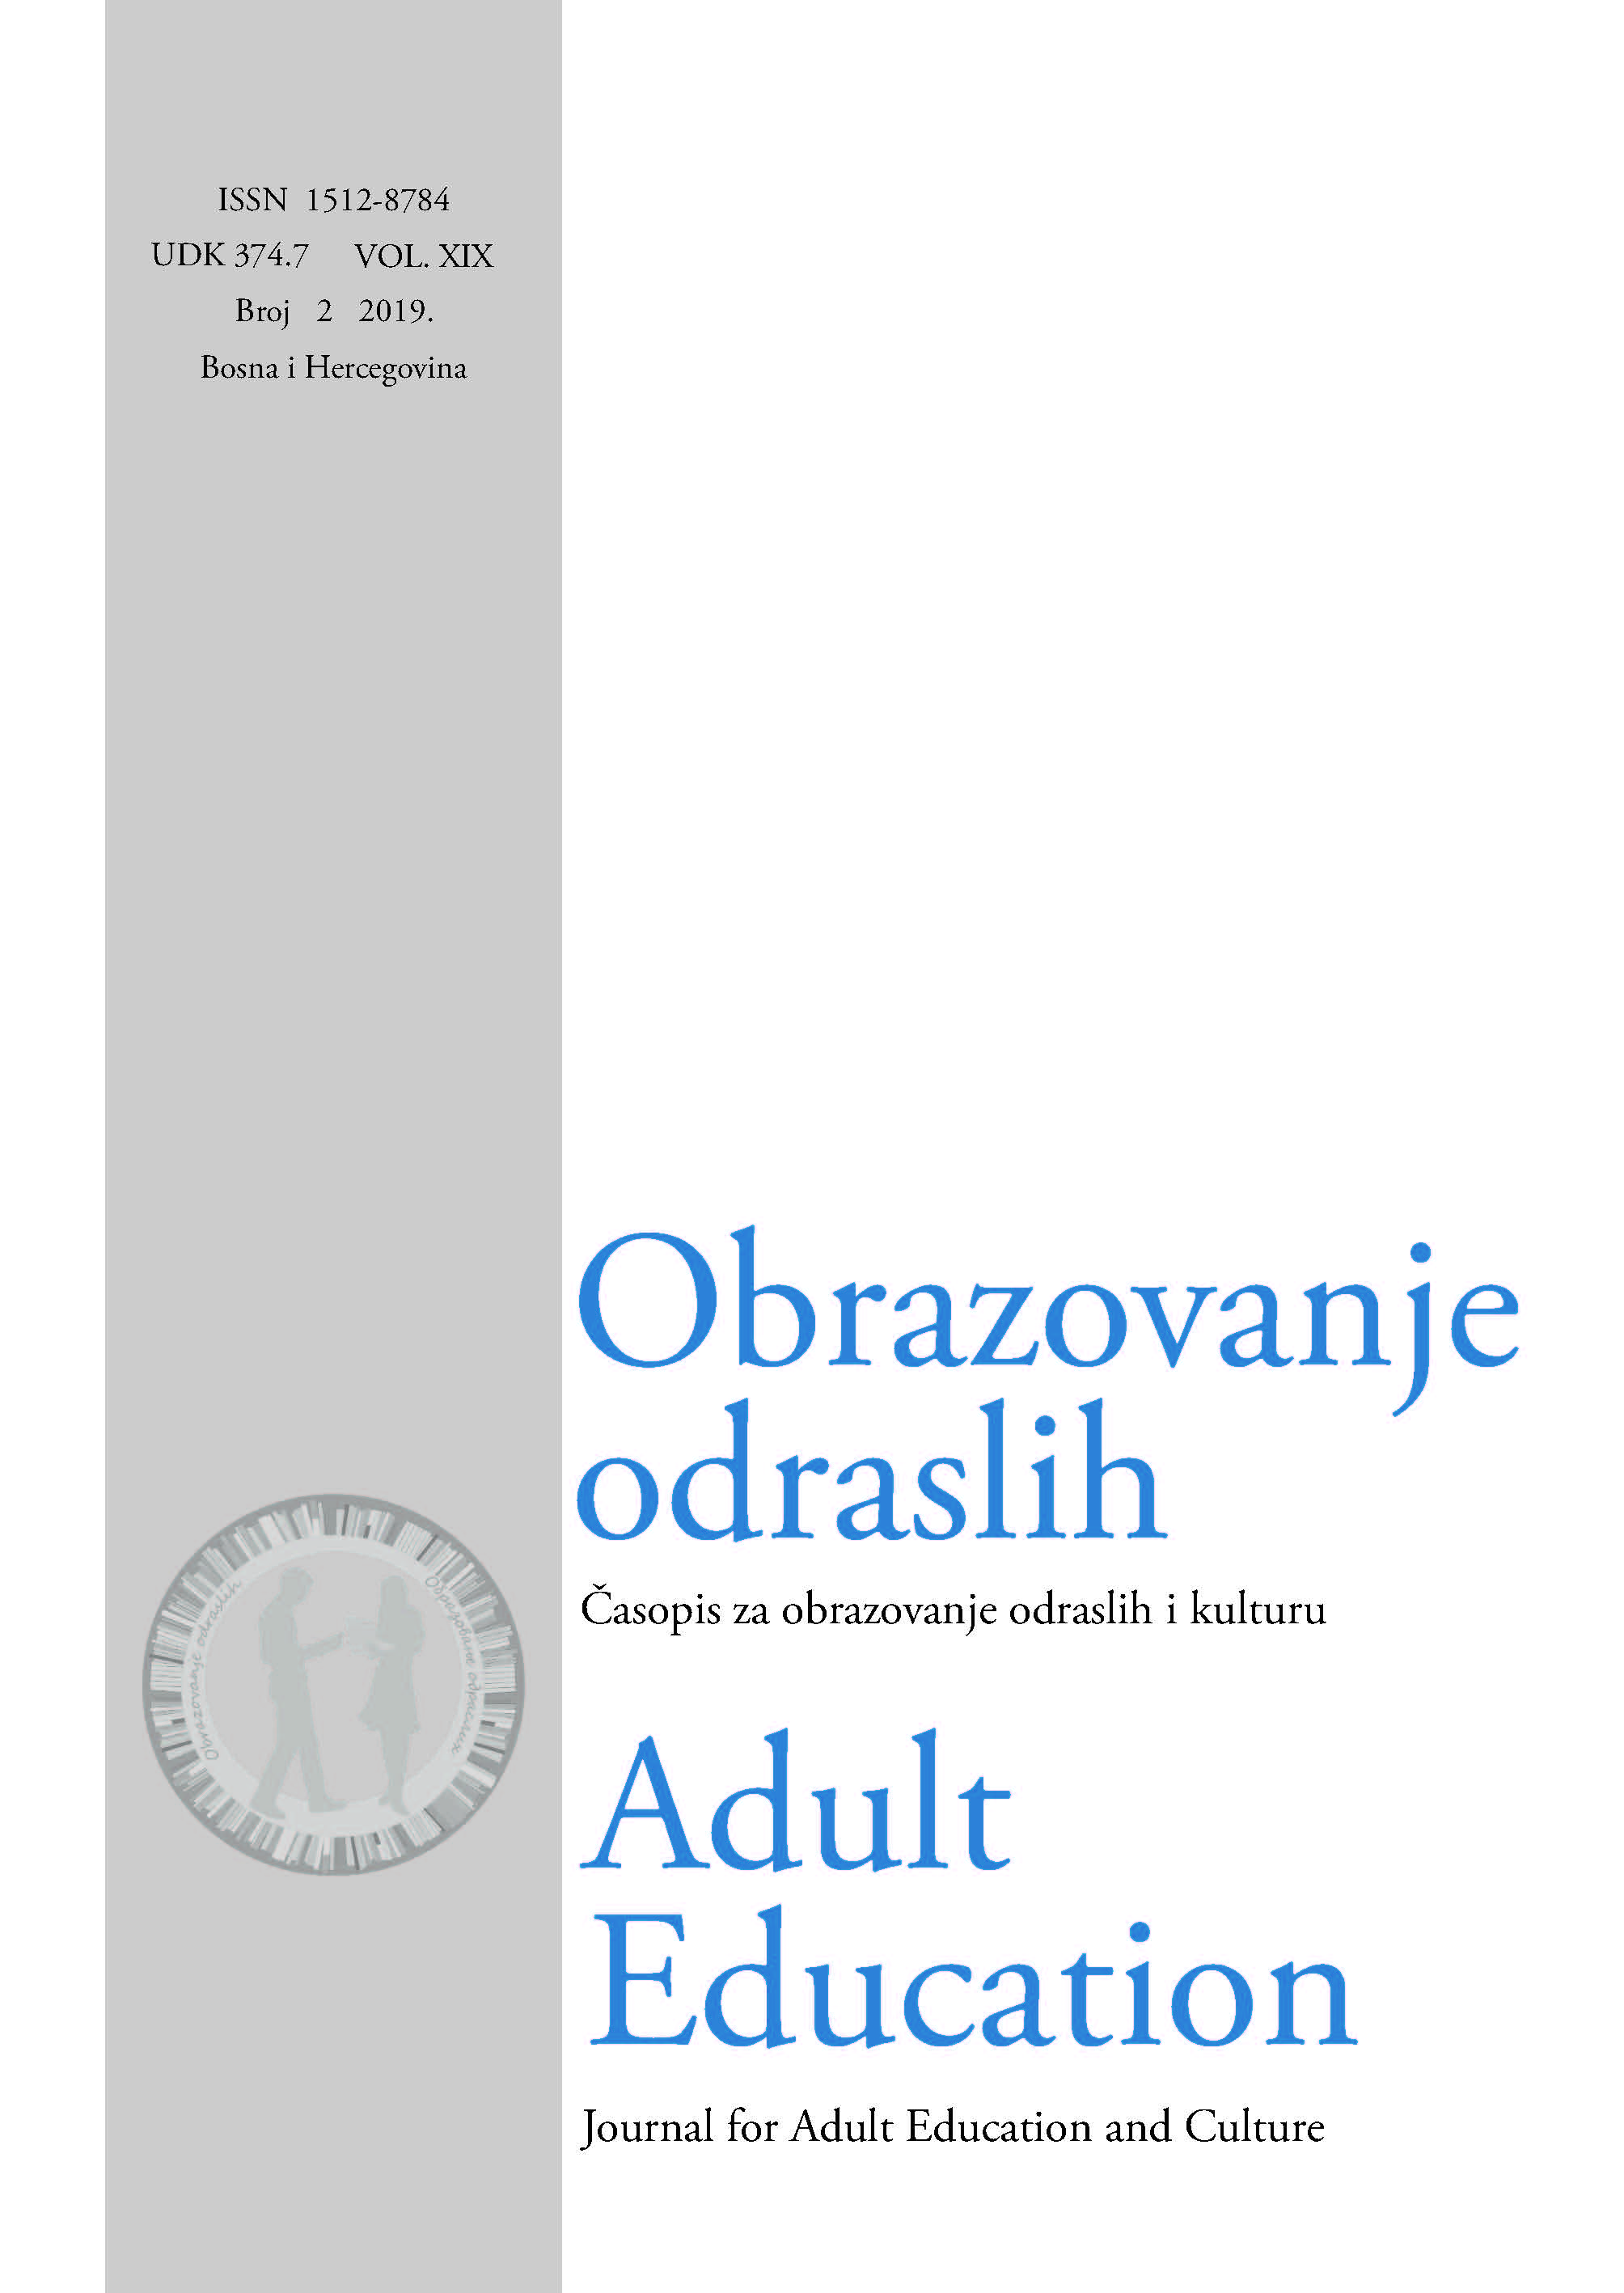 Antropology of the Family and Family Life Cover Image